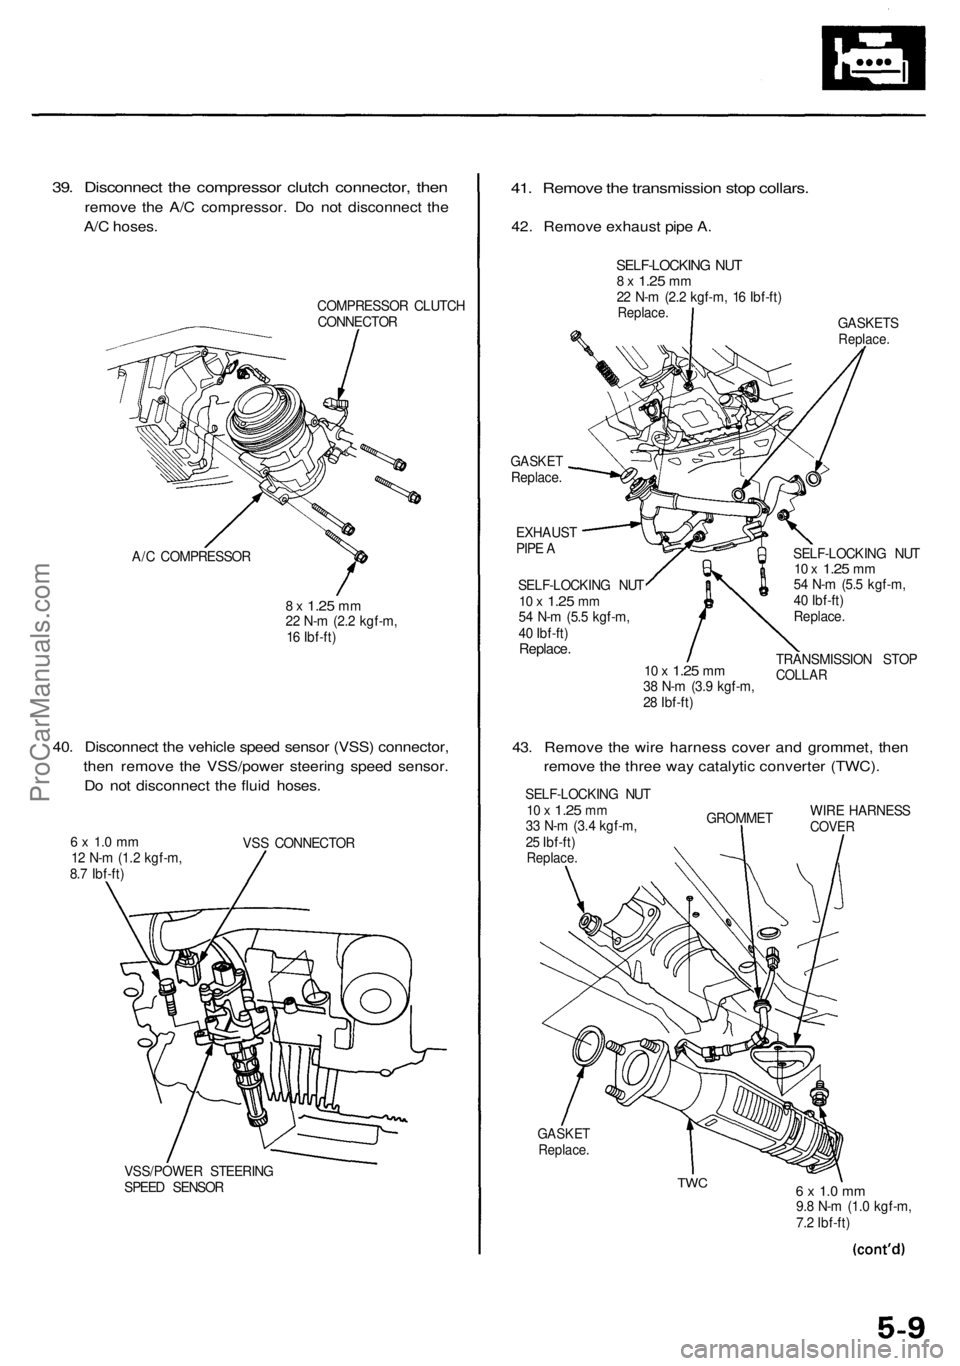 ACURA RL KA9 1996  Service Repair Manual 
39. Disconnect the compressor clutch connector, then

remove the A/C compressor. Do not disconnect the

A/C hoses.

COMPRESSOR CLUTCH

CONNECTOR

A/C COMPRESSOR

8 x
 1.25
 mm

22 N-m (2.2 kgf-m,

16